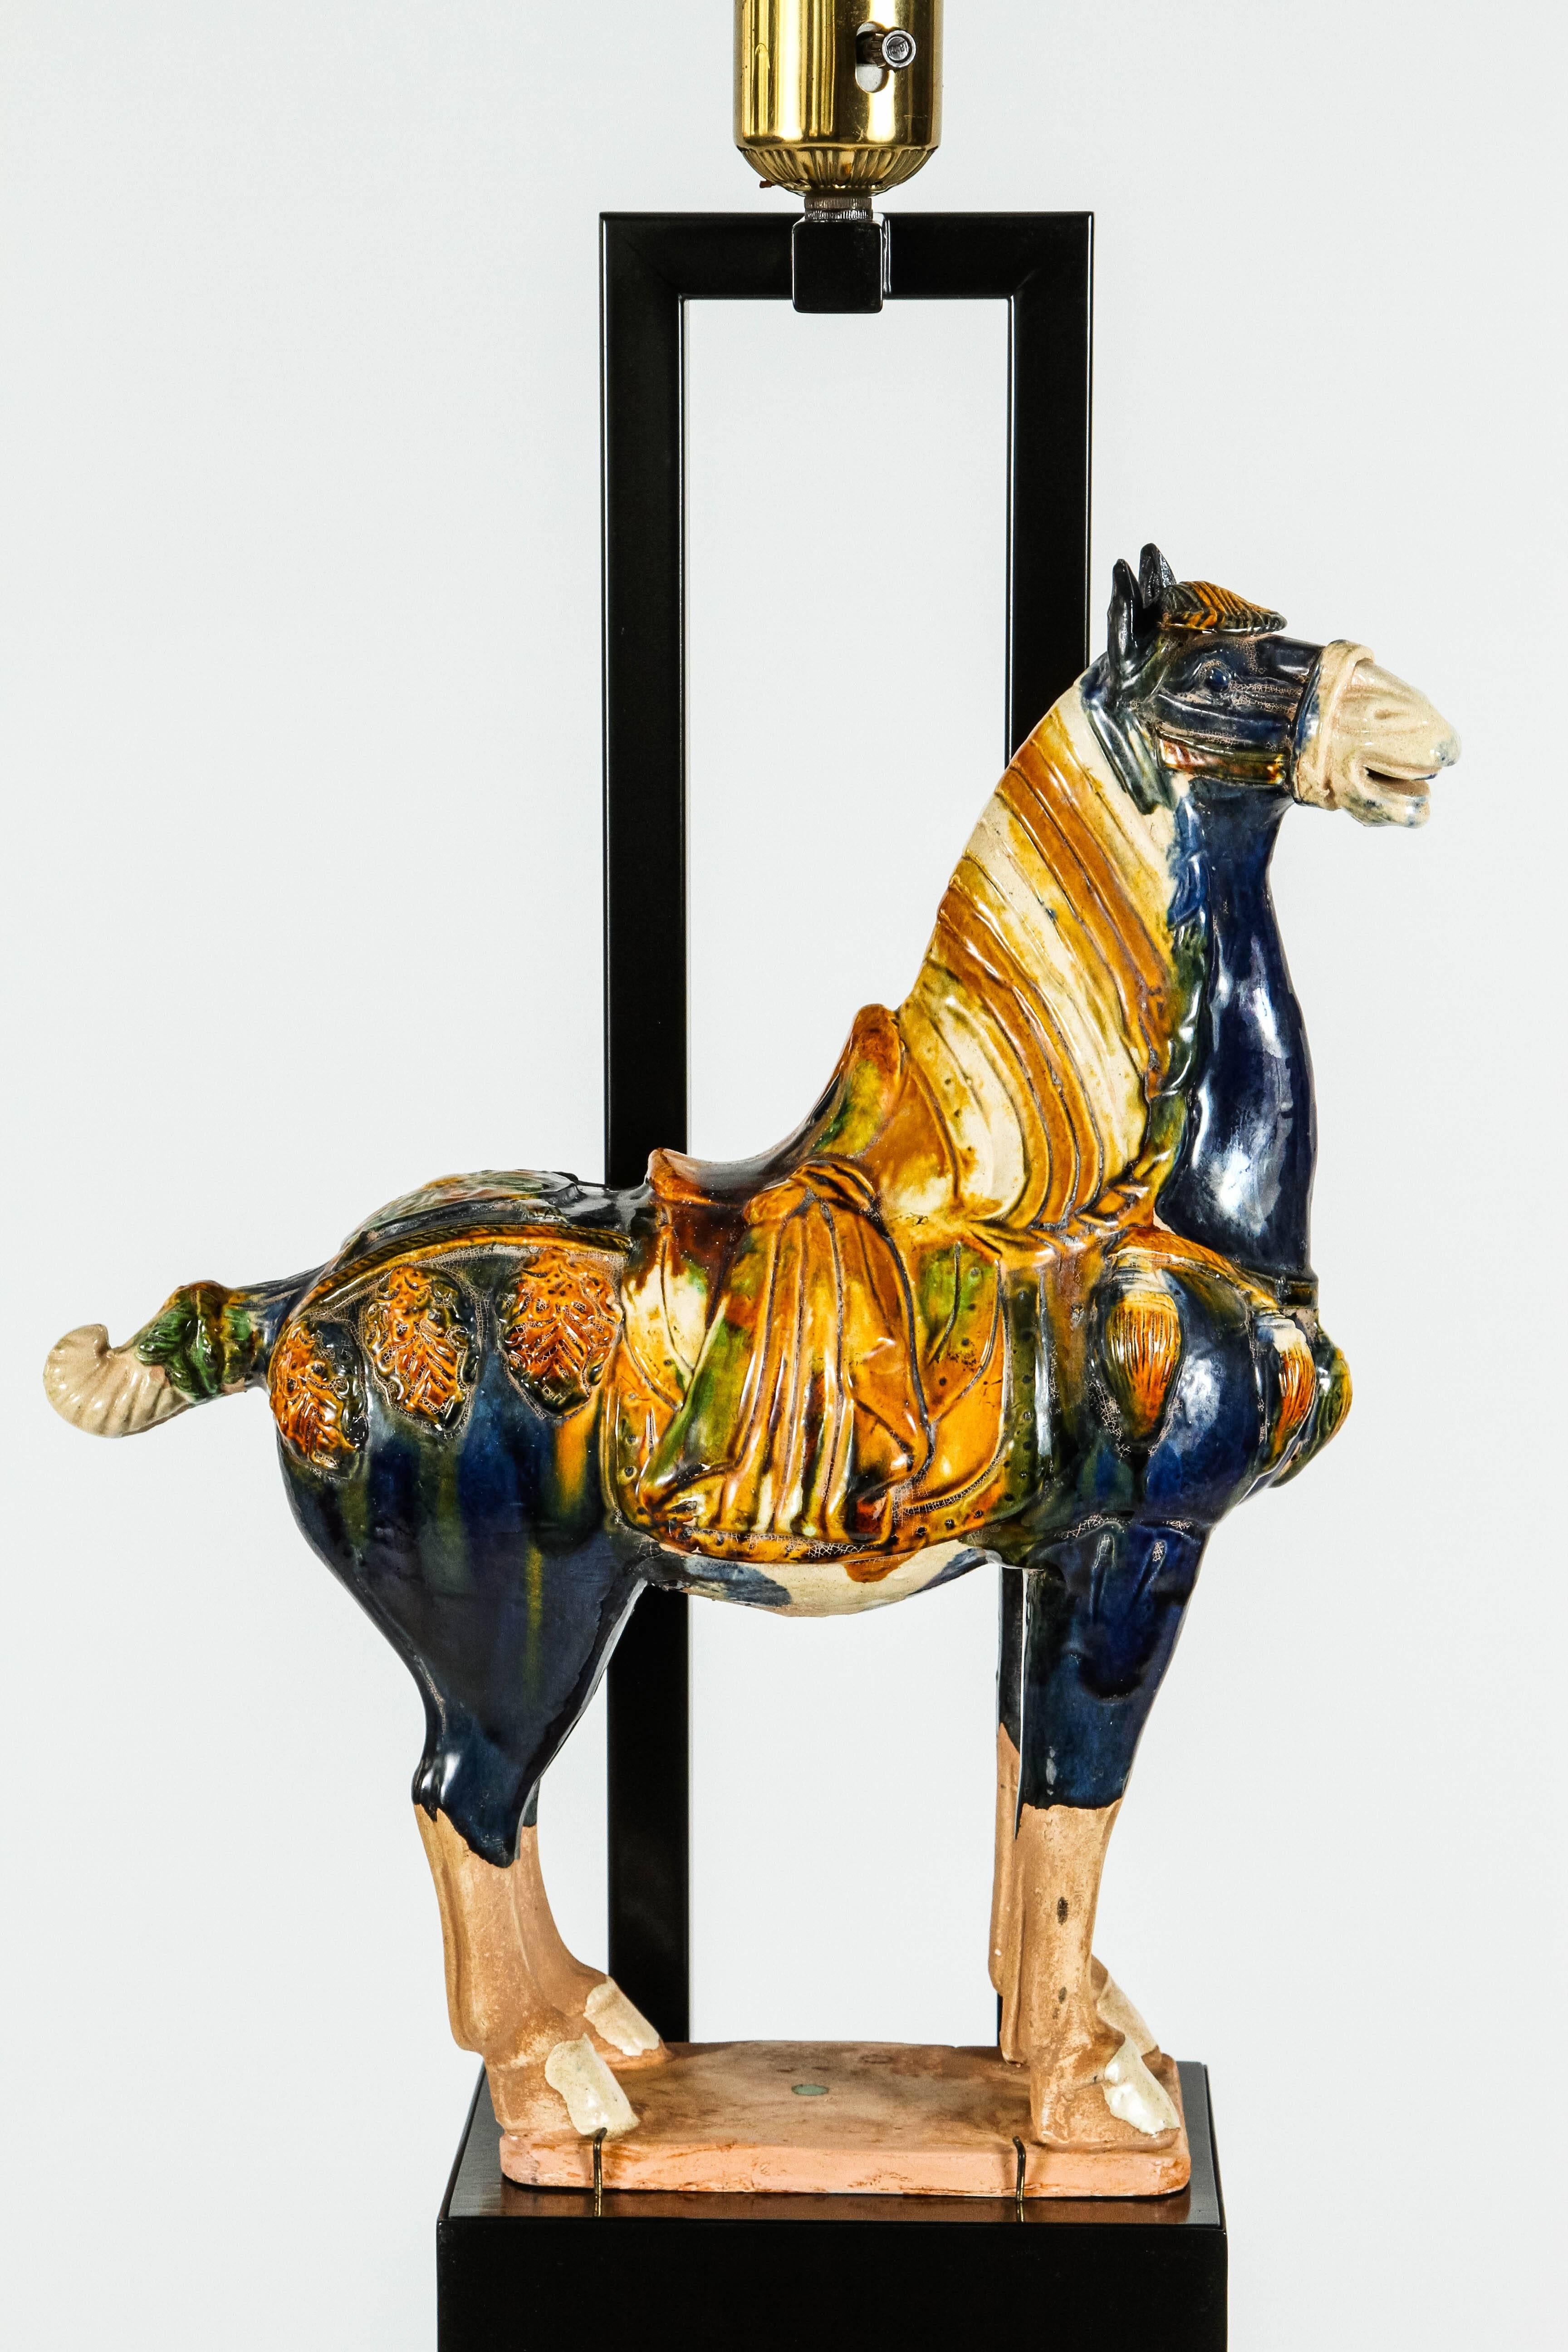 Glazed Armature Floor Lamp with Horse by William Haines